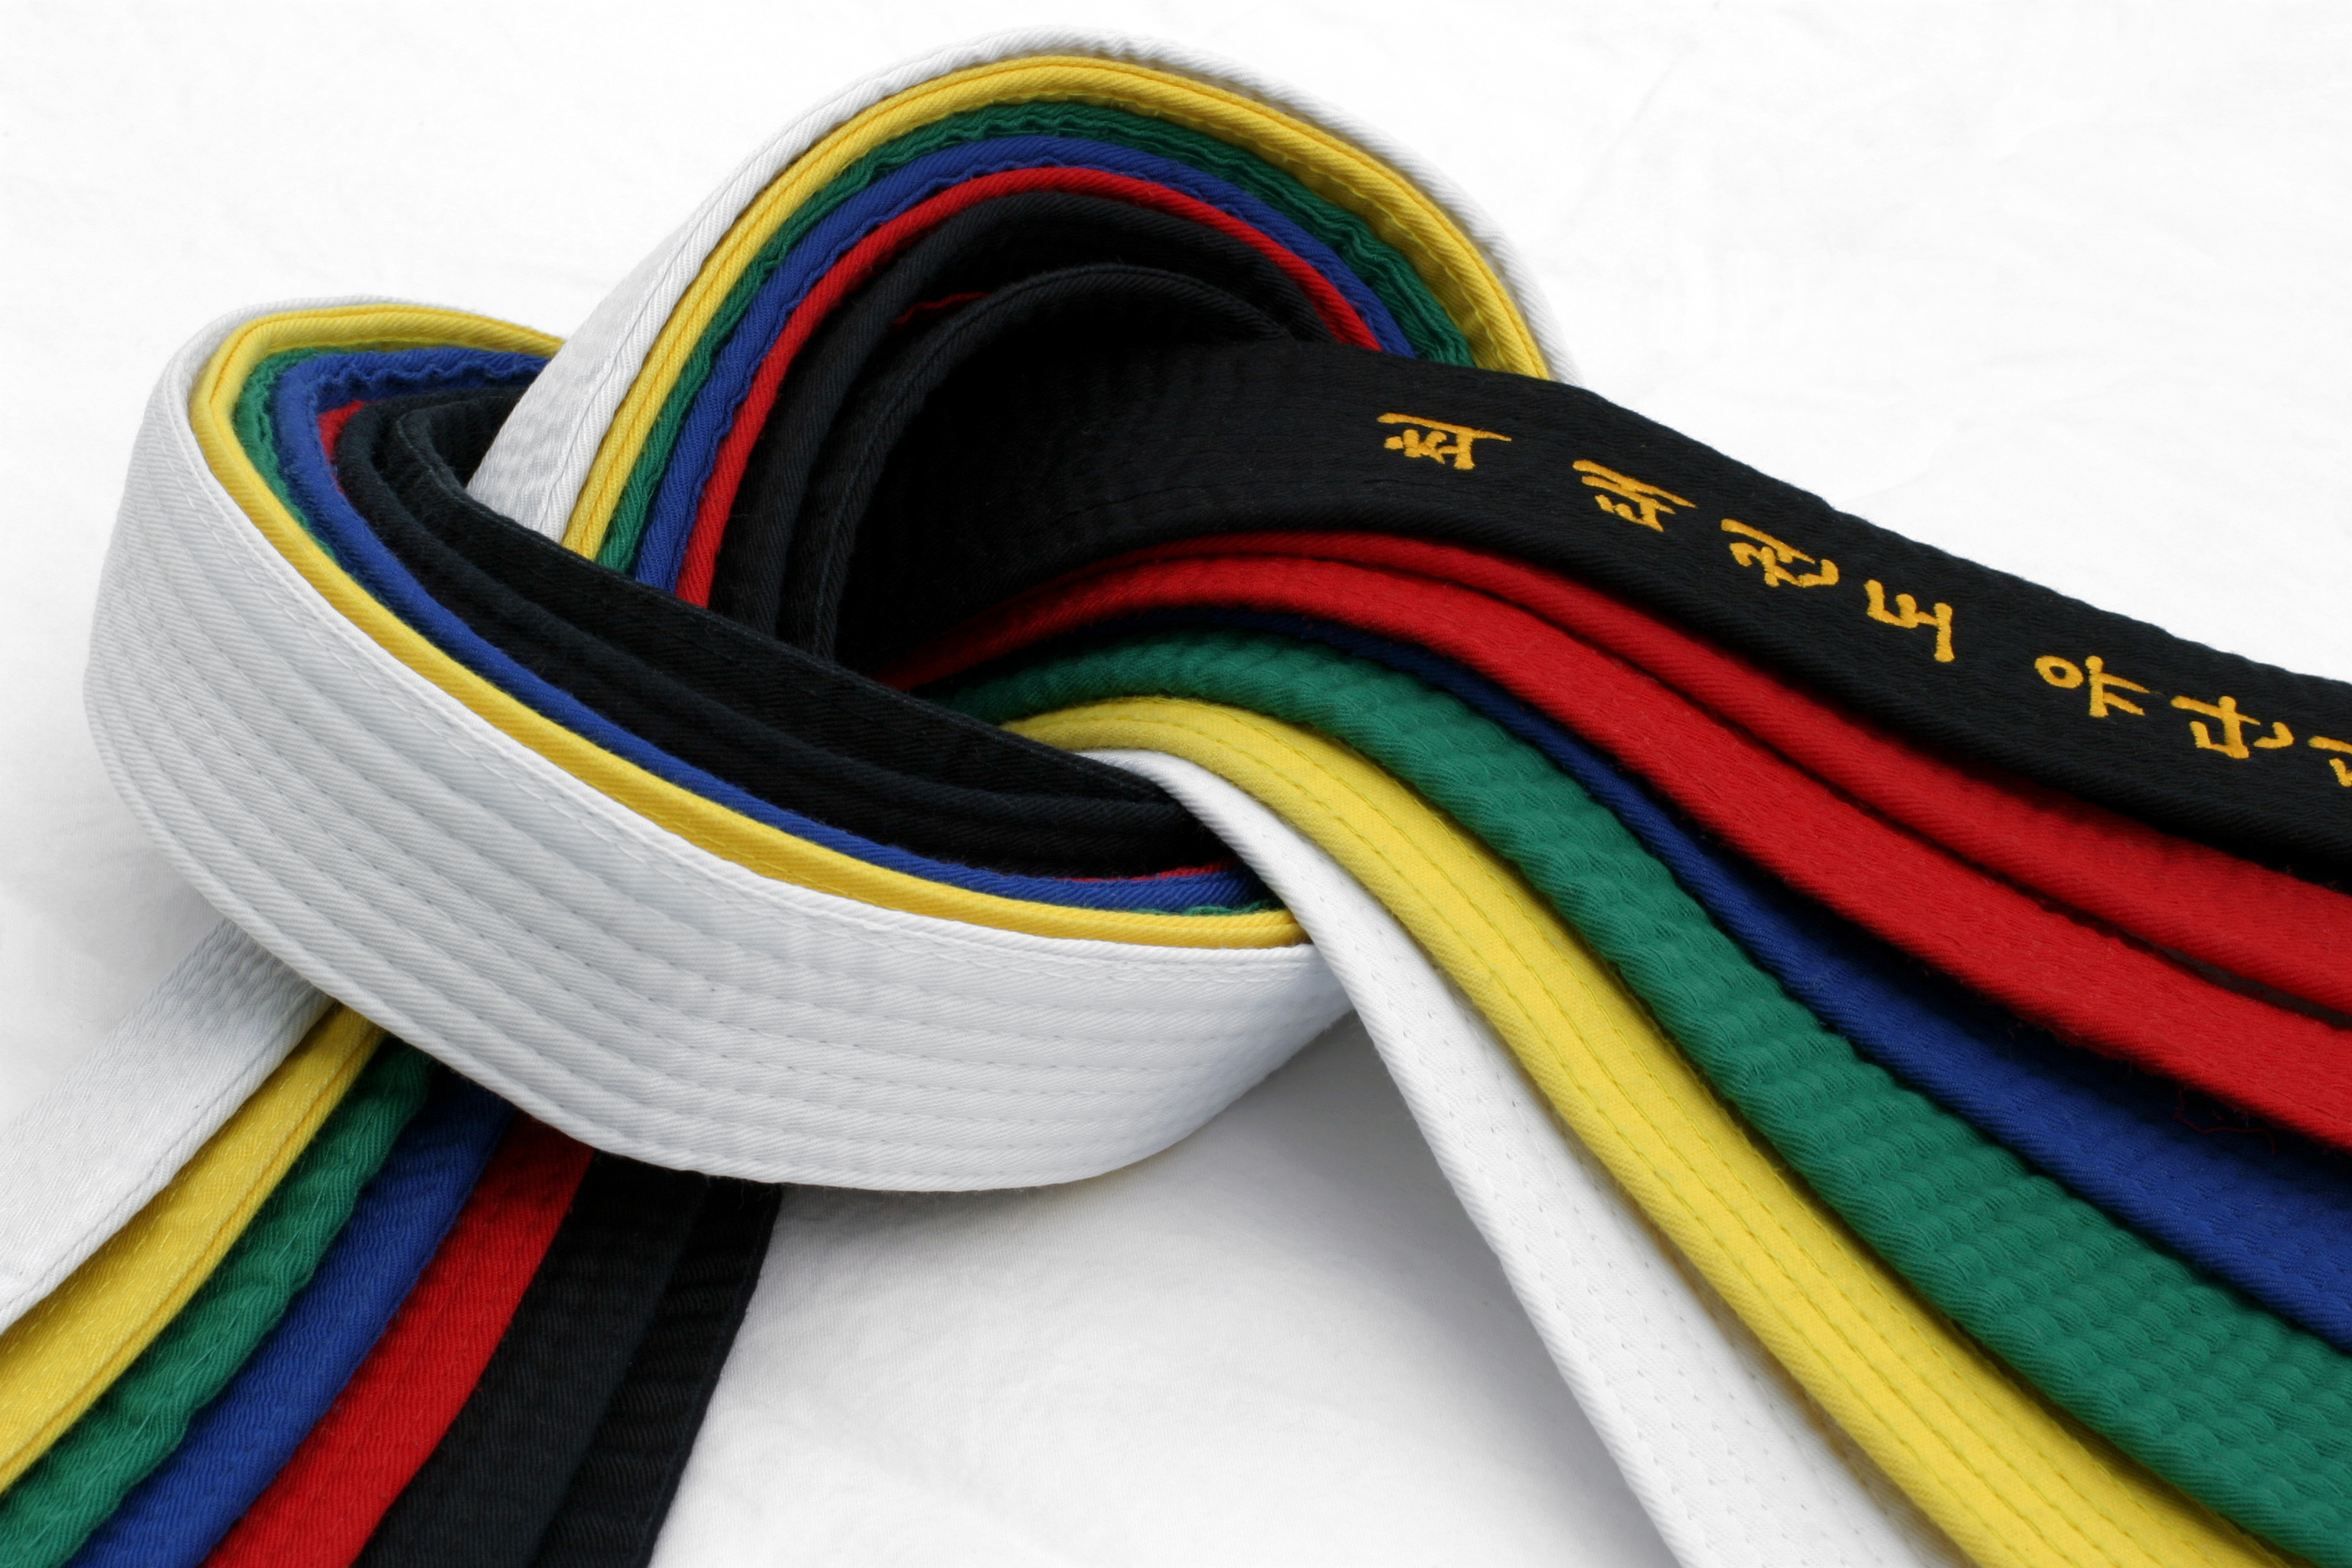 The Grading and Ranking Behind the Martial Arts Belts - BookMartialArts.com